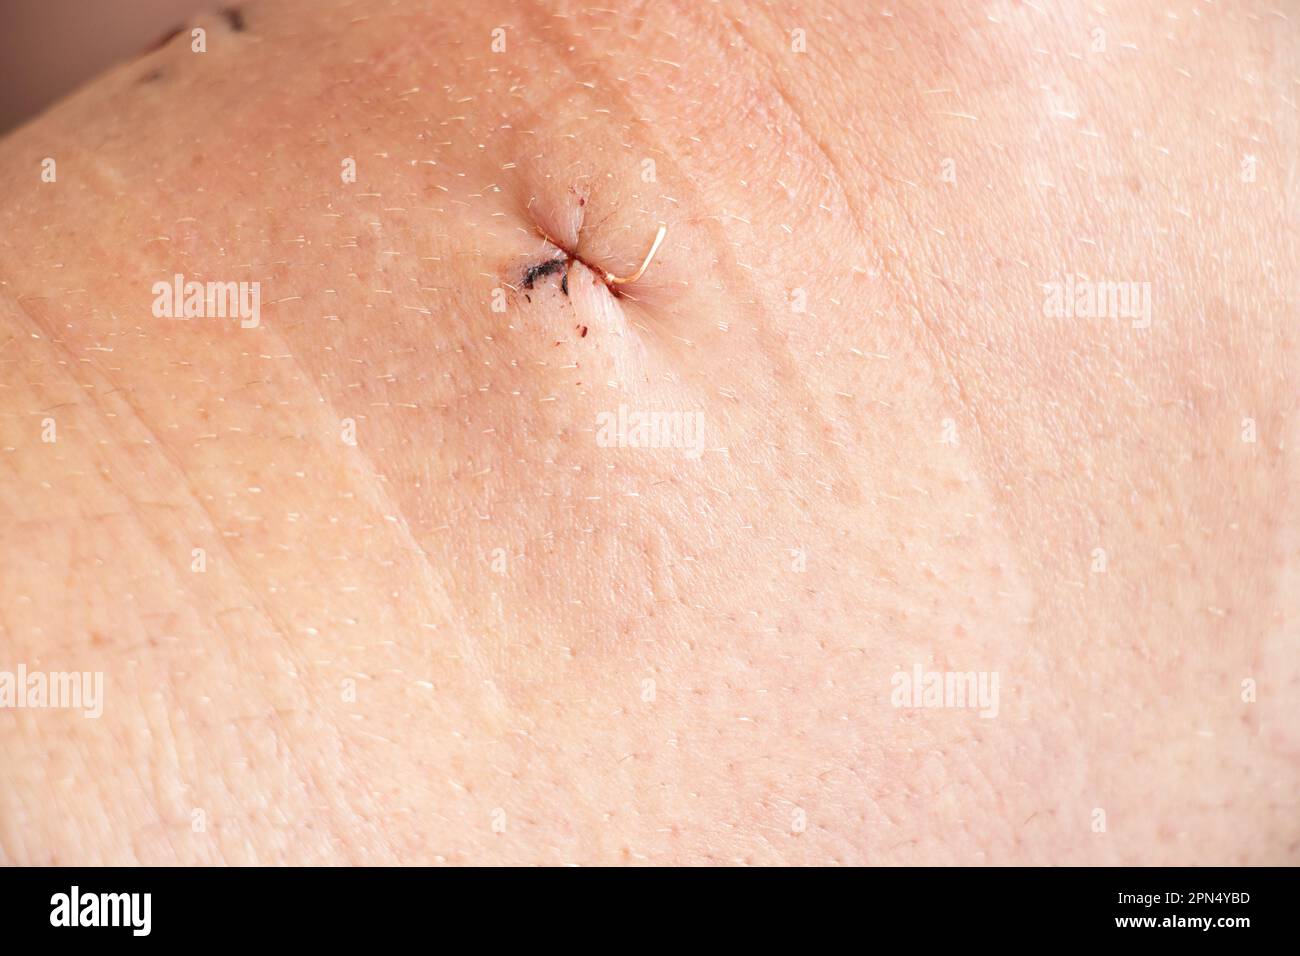 Postoperative sutures on the knee and lower leg after meniscus replacement in a man, stitched incisions Stock Photo